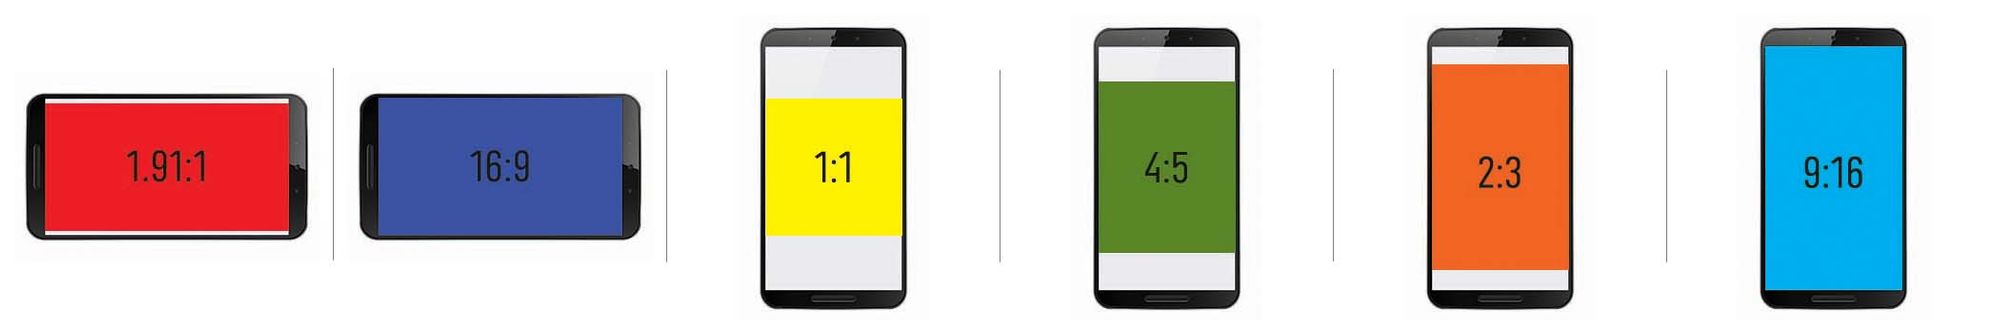 Aspect Ratio of images and video's displayed on a mobile phone (@effectivespend)